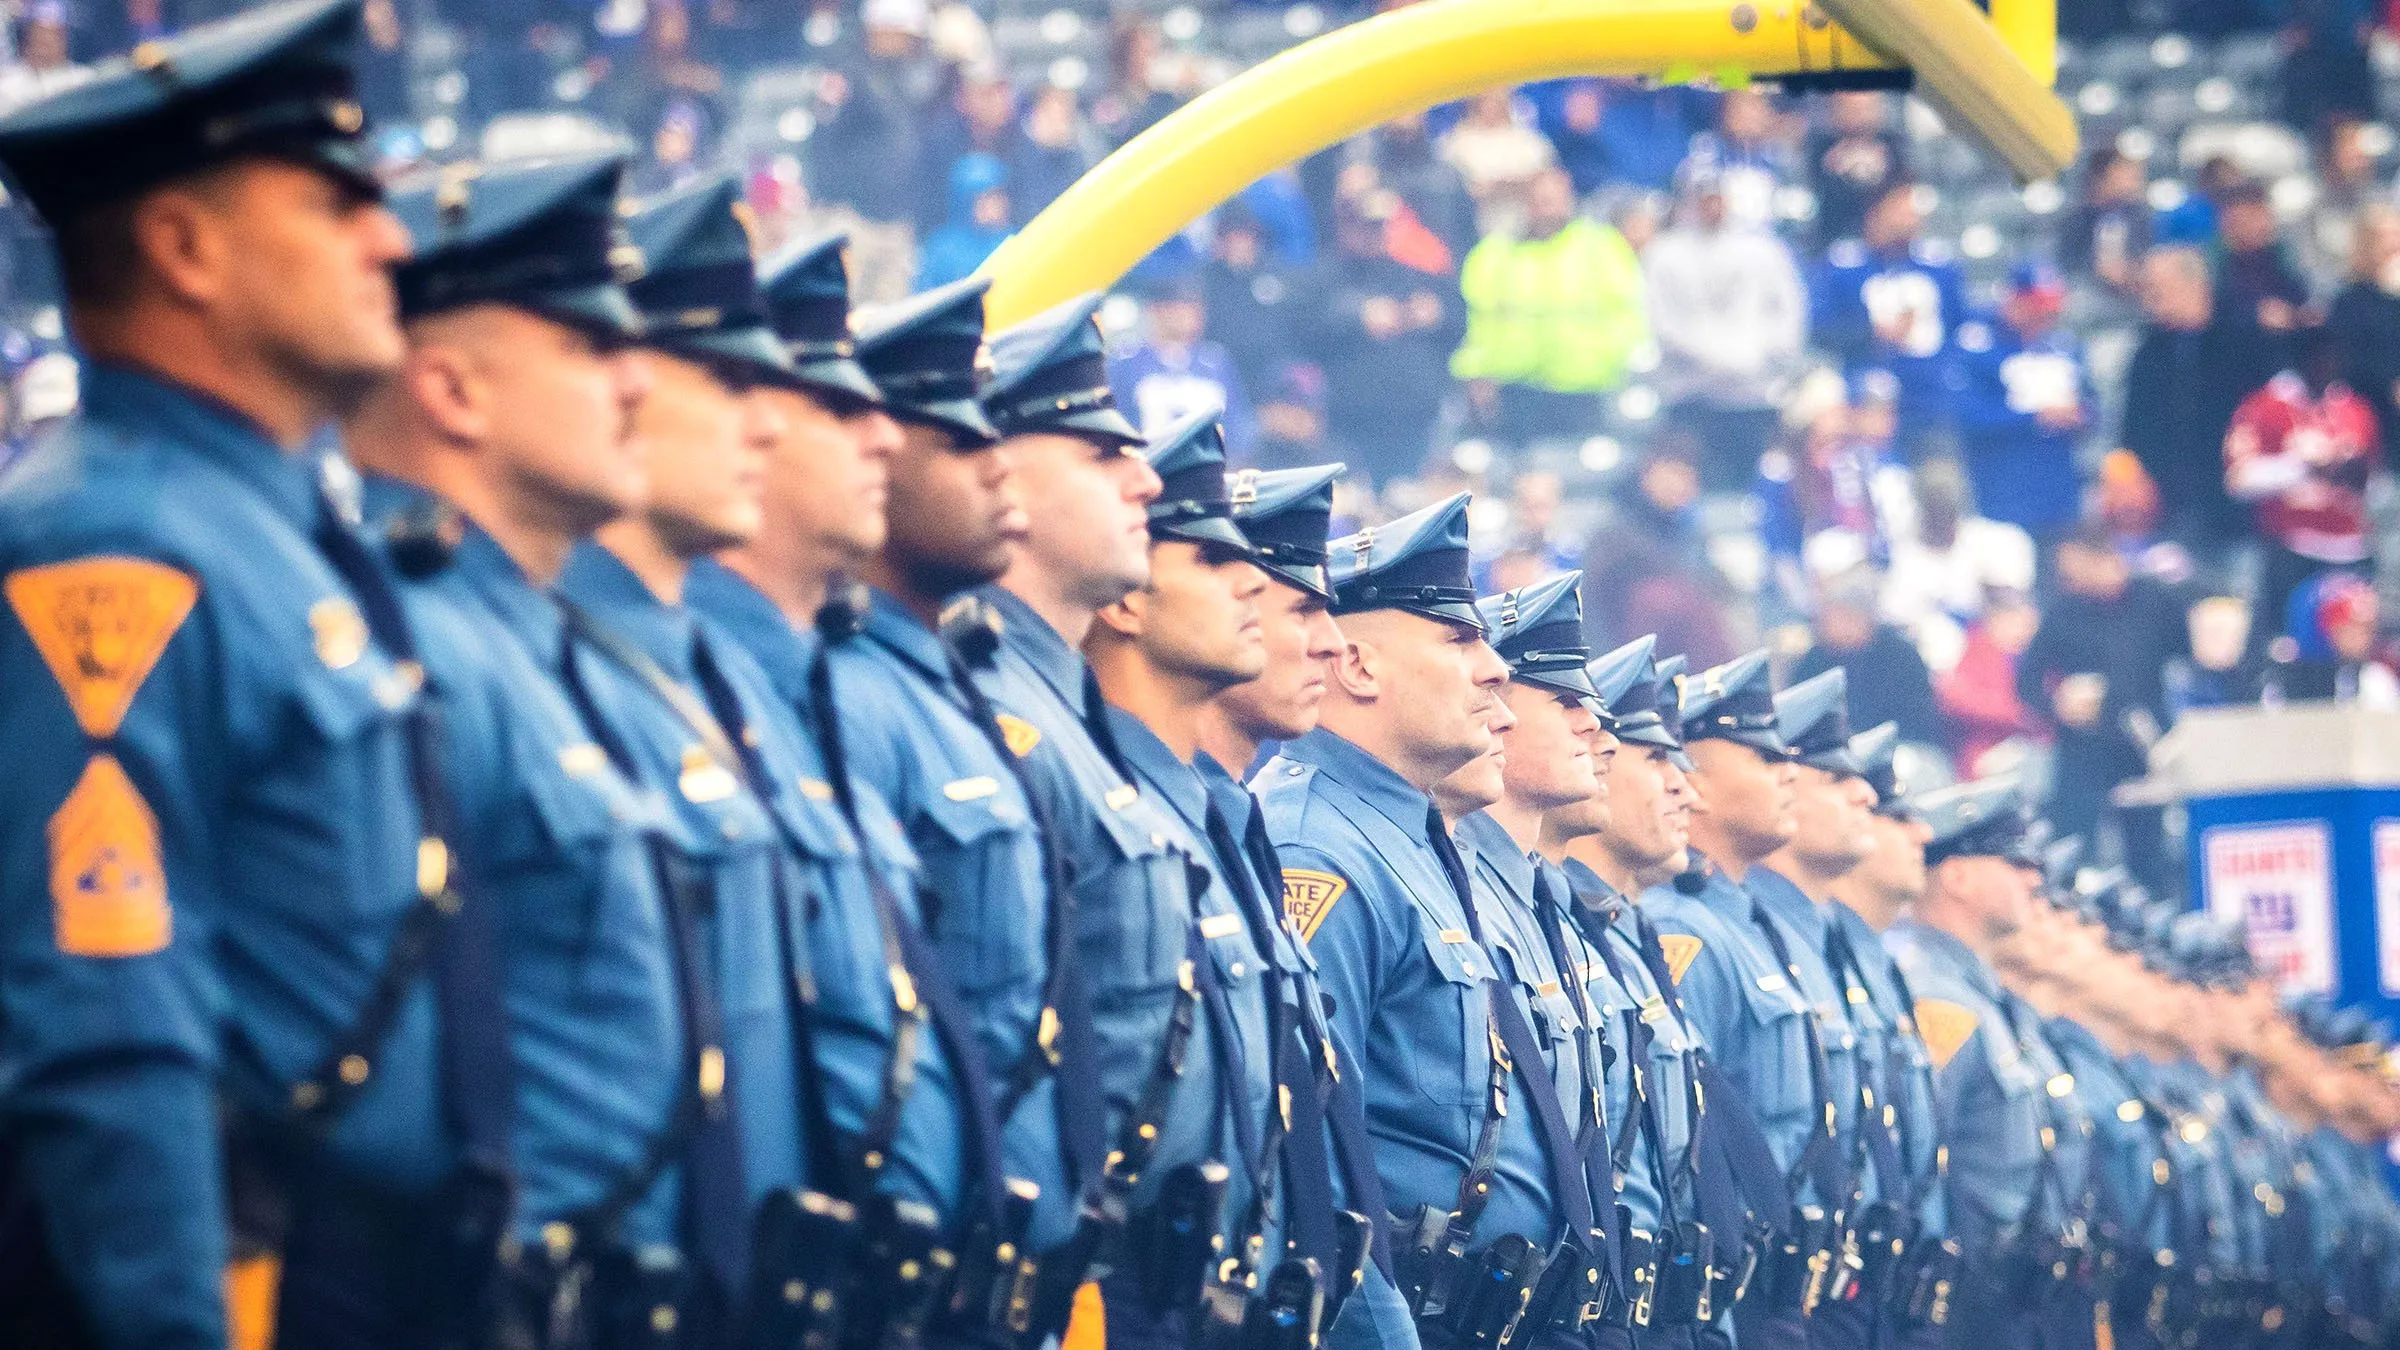 Police officers at MetLife Stadium in Rutherford, New Jersey in October 2018. Image: Shutterstock